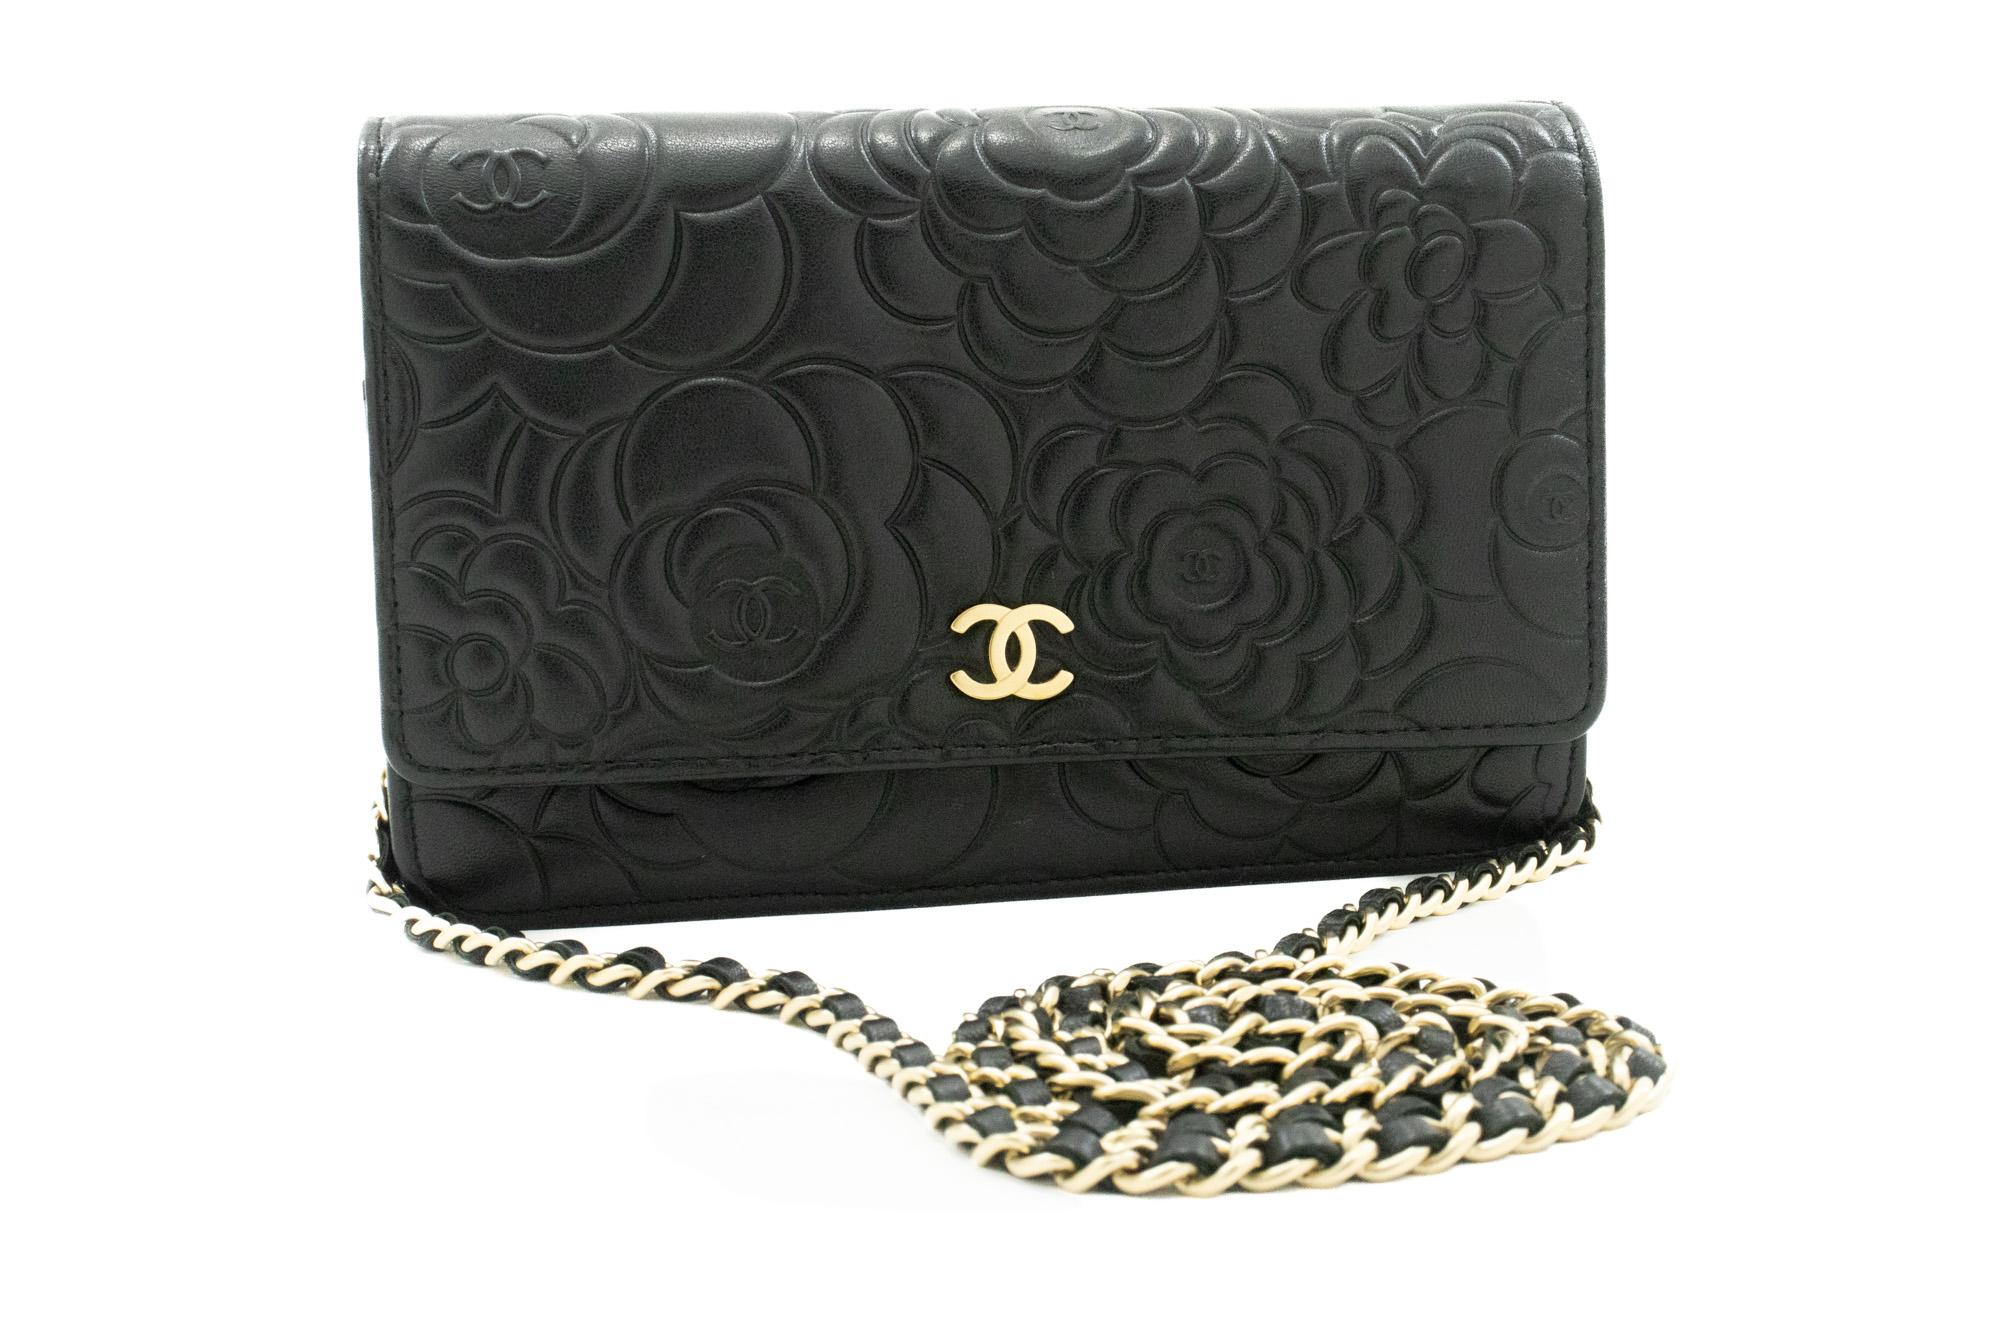 An authentic CHANEL Black Camellia Embossed Wallet On Chain WOC Shoulder Bag. The color is Black. The outside material is Leather. The pattern is Embossed. This item is Contemporary. The year of manufacture would be 2013.
Conditions &